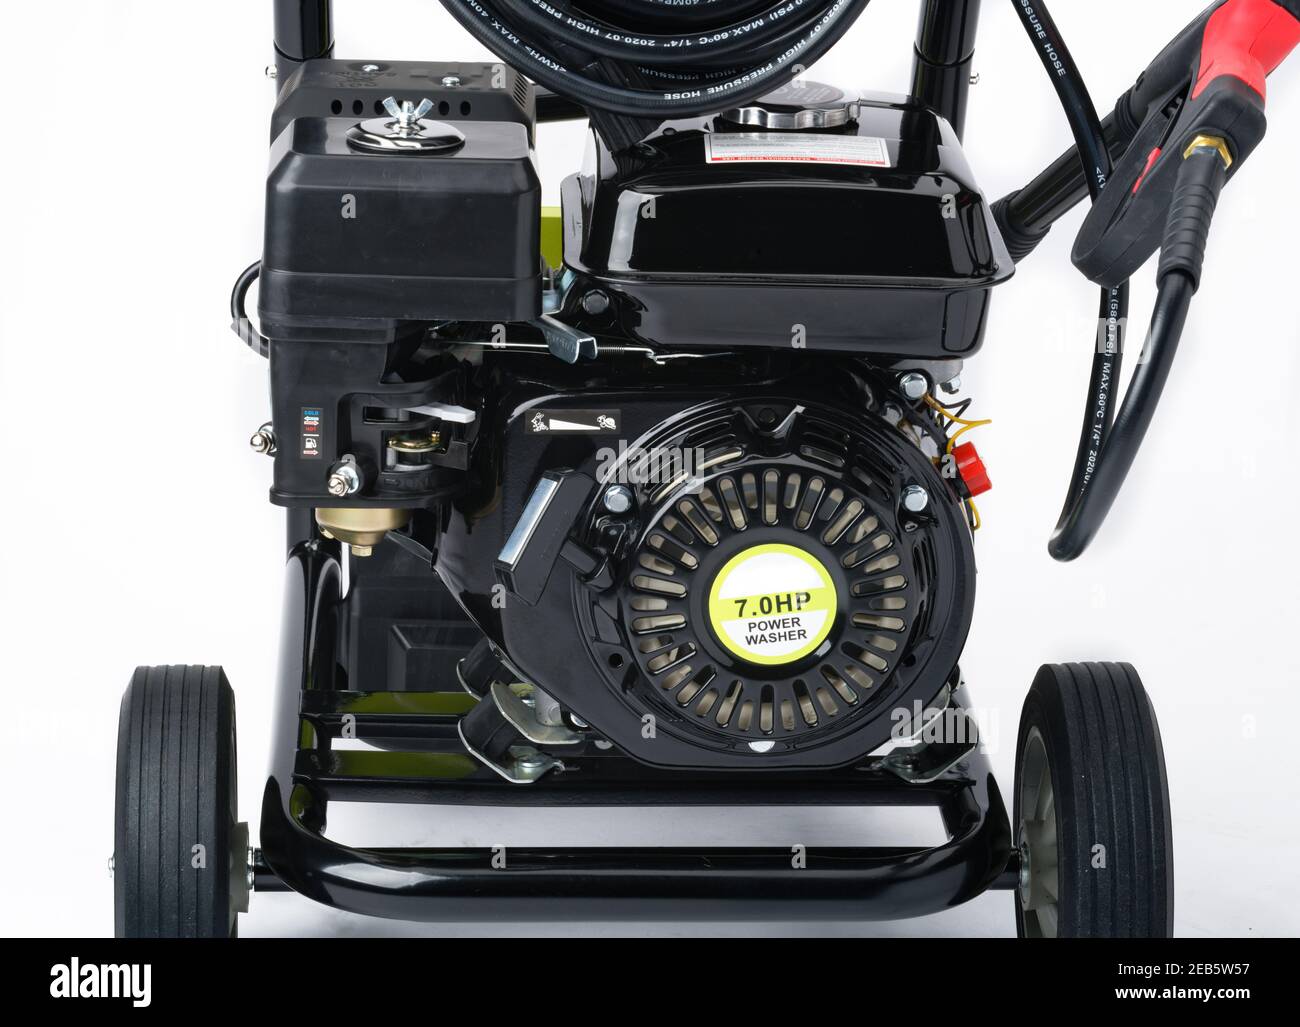 Petrol engined pressure washer. Water pumped through a powerful engine to make a strong jet for cleaning outdoor surfaces. Cars, patios, boats etc. Stock Photo